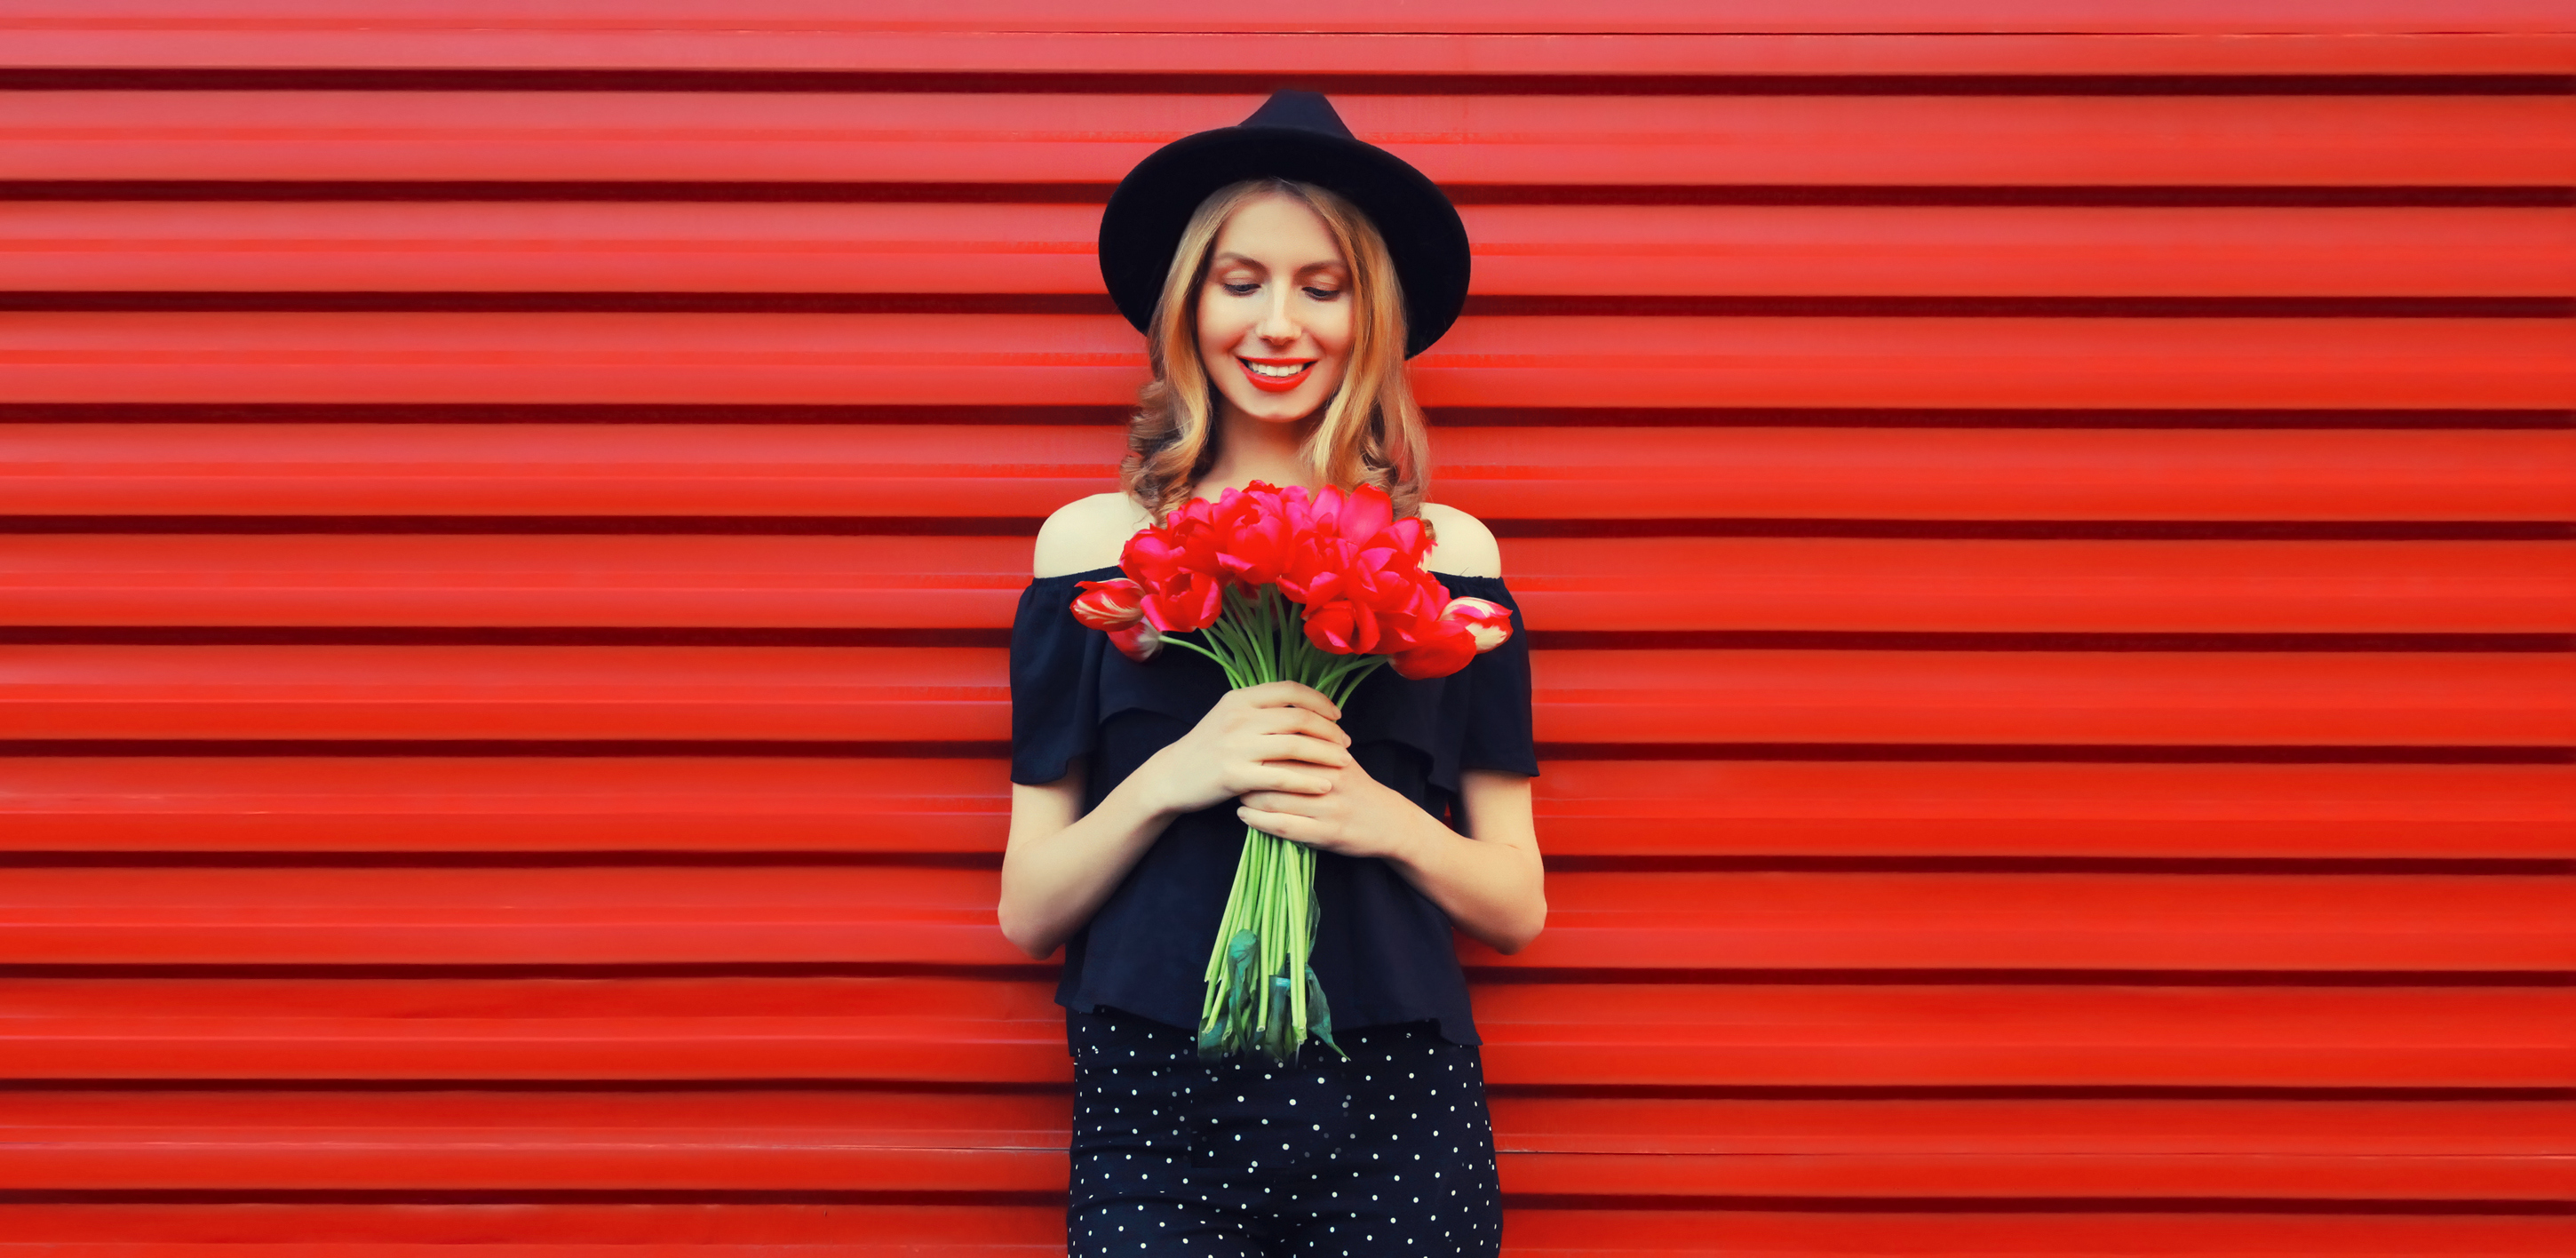 A woman wearing black and holding a bunch of red roses